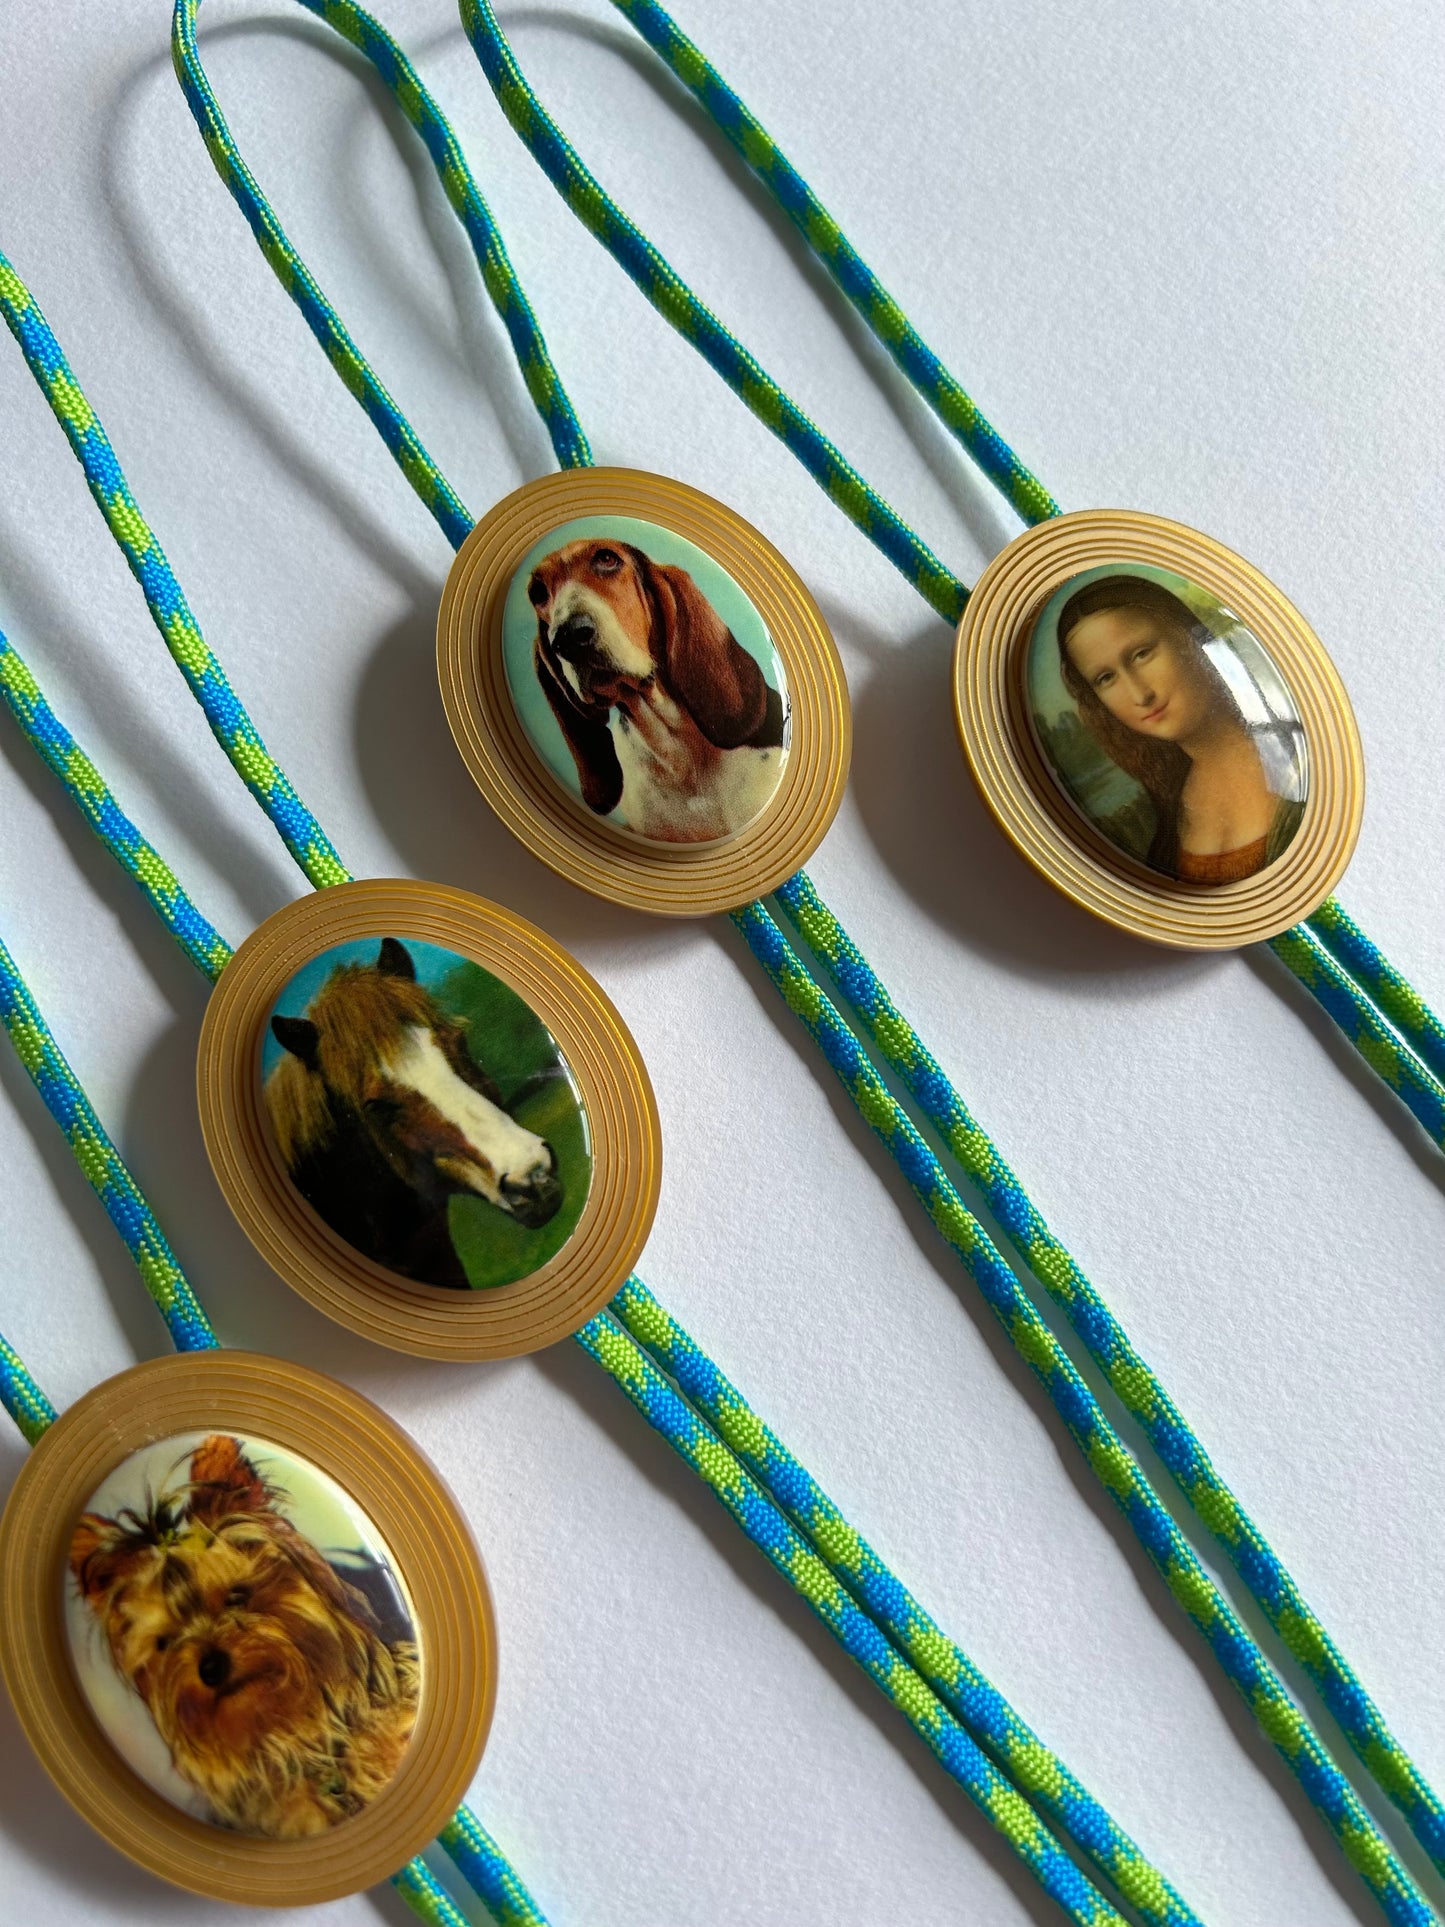 Green and Gold Acrylic Bolo Ties